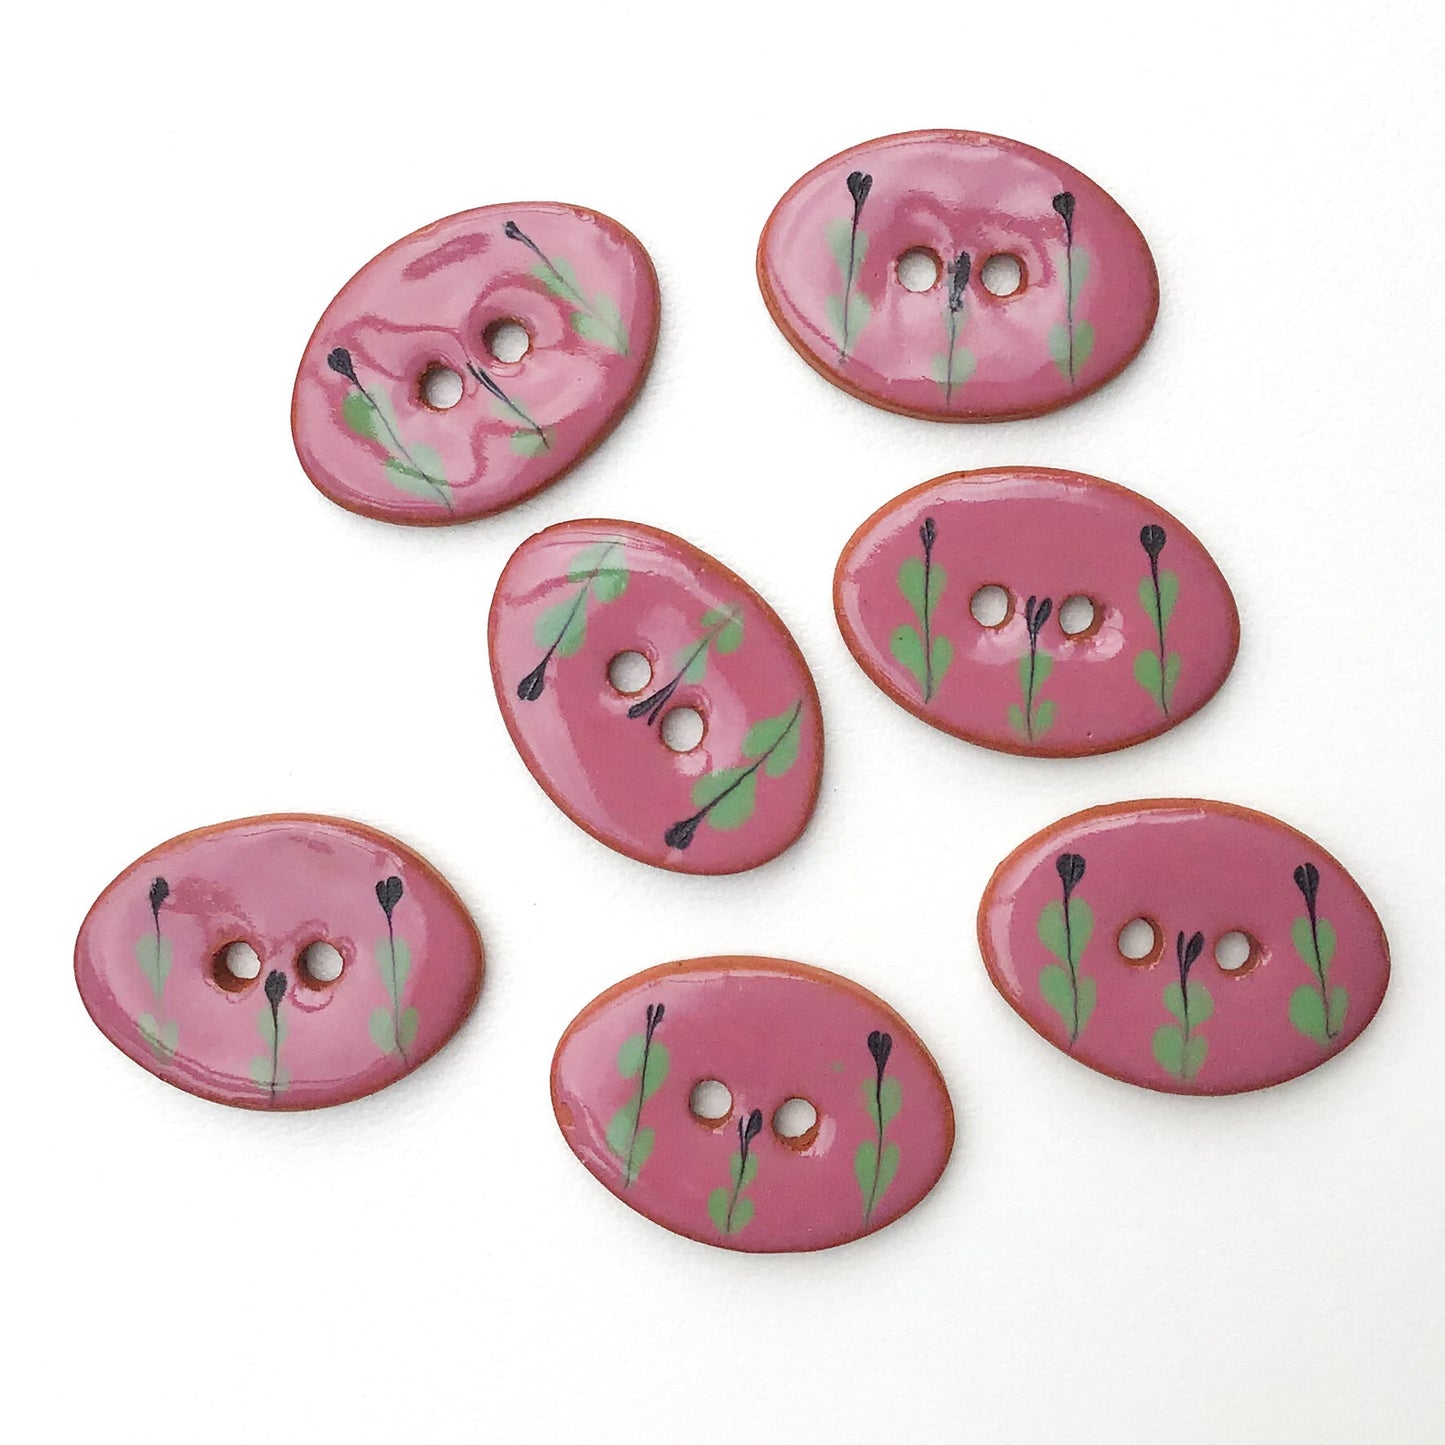 Oval Ceramic Buttons - Hand Painted Clay Buttons with Small Flower Detail - Mauve + Green - 5/8" x 7/8" - 7 Pack